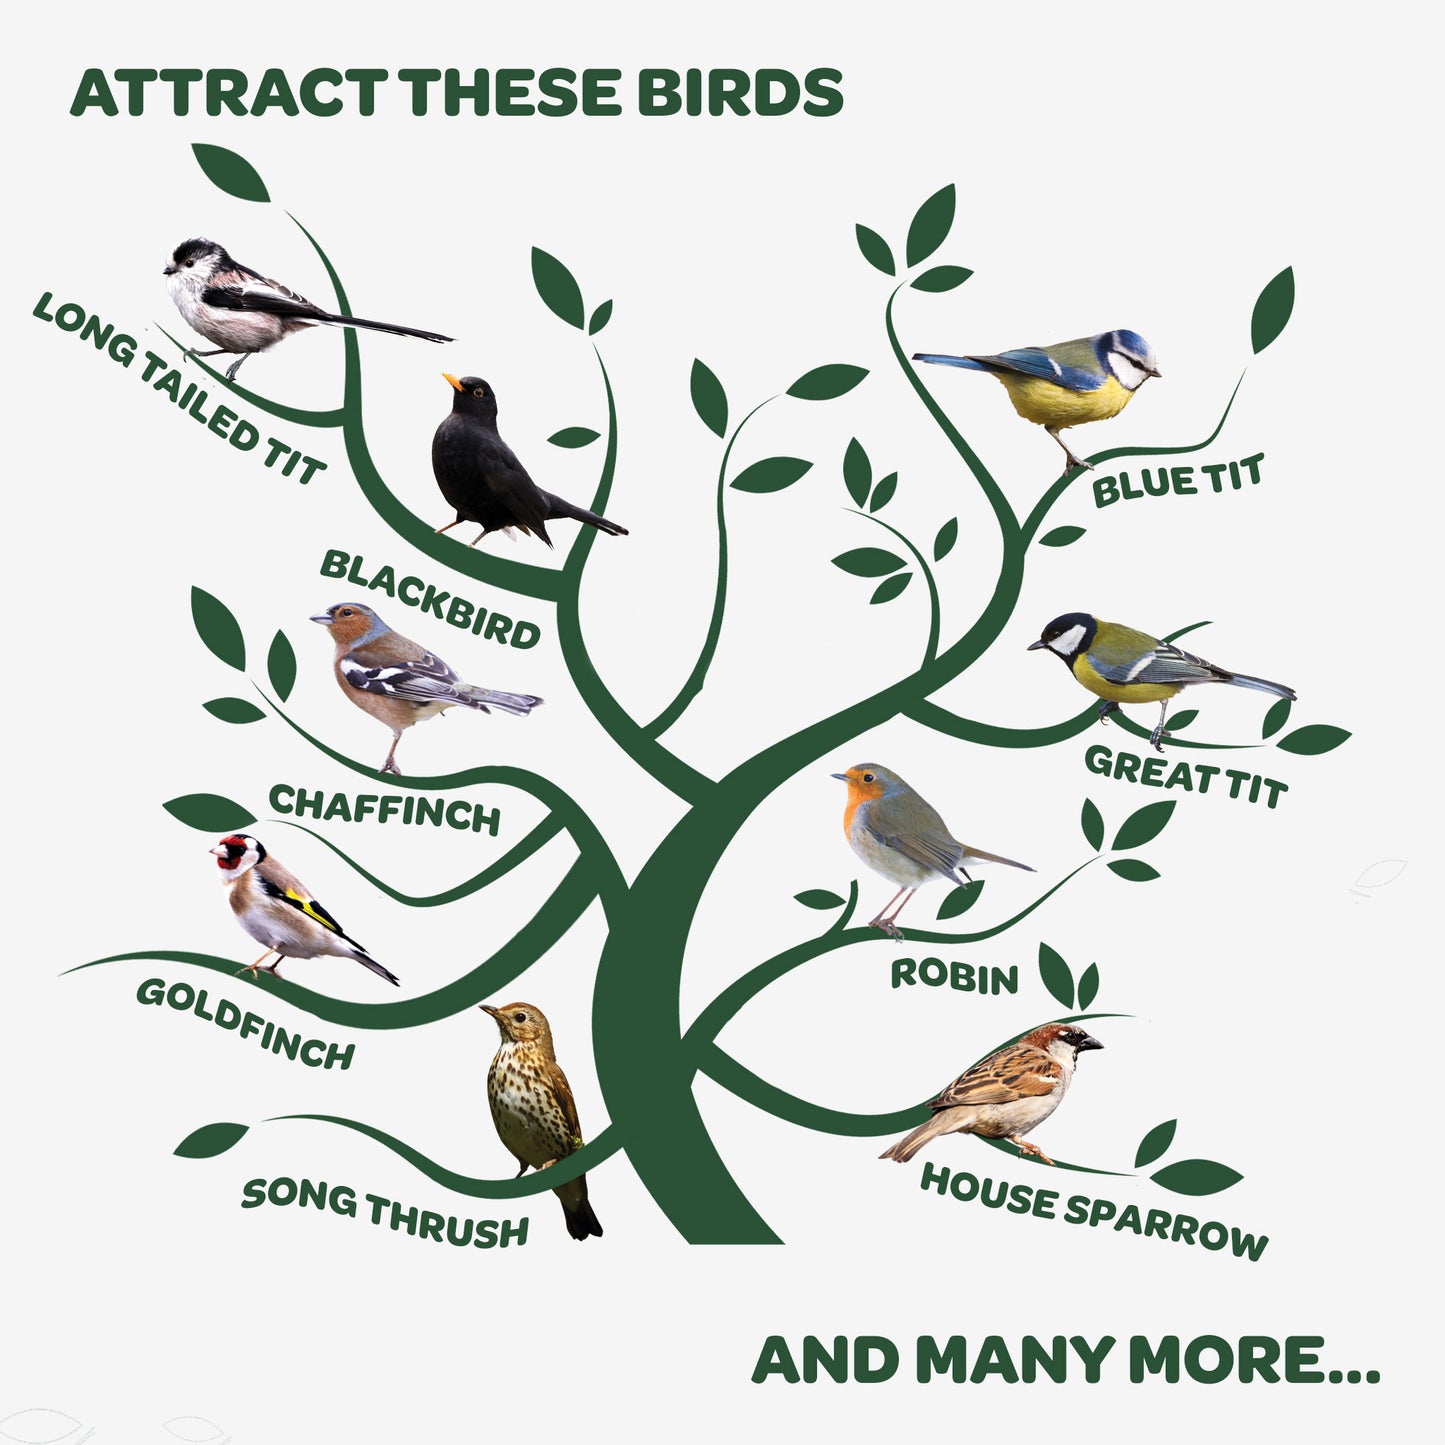 Peckish Natural Balance Coconut Feeders attract these birds infographic